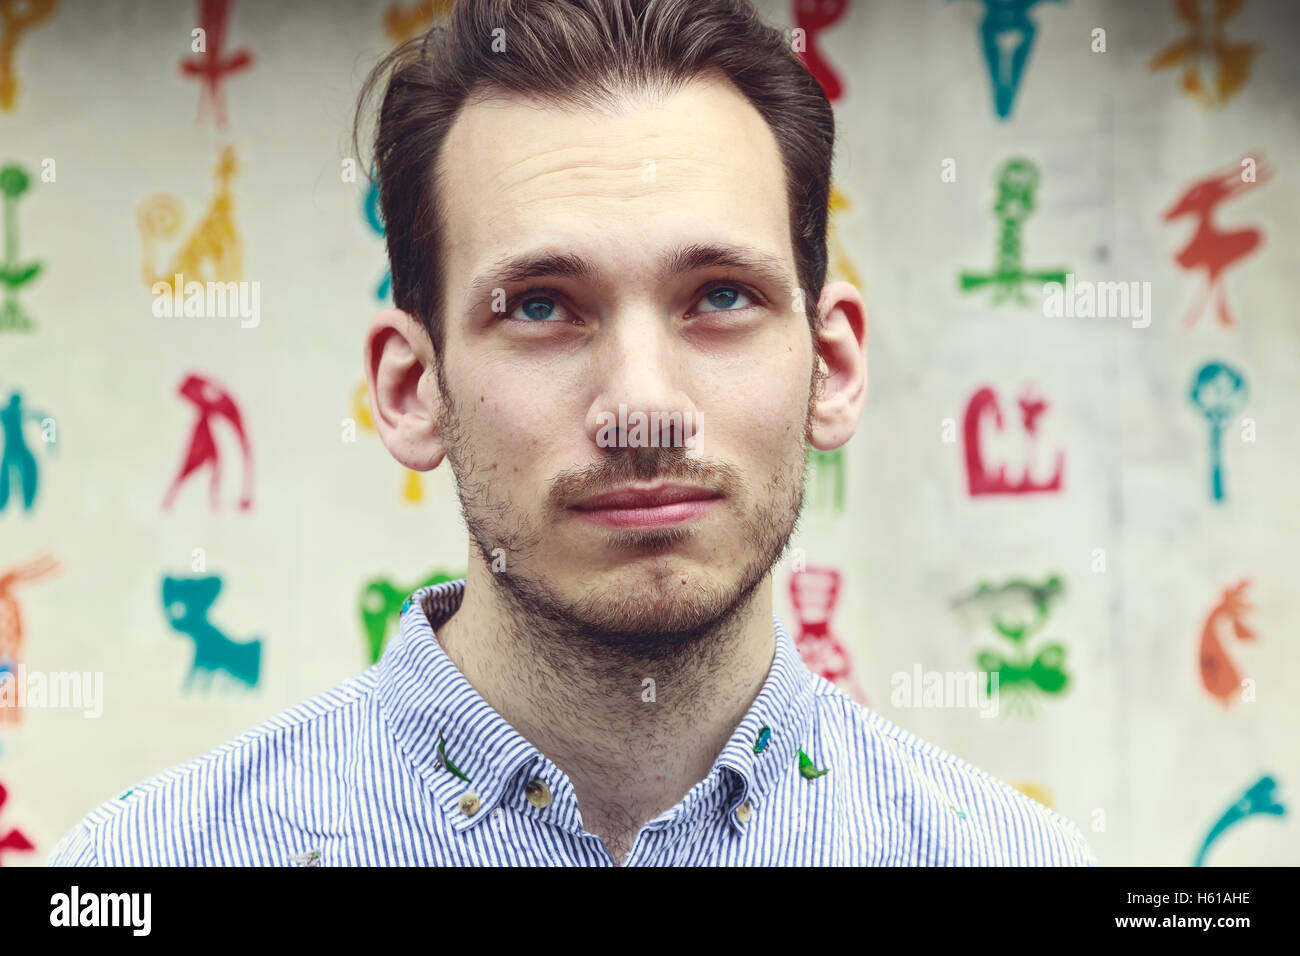 Portrait of a doubtful young man in front of a colourful funky background Stock Photo